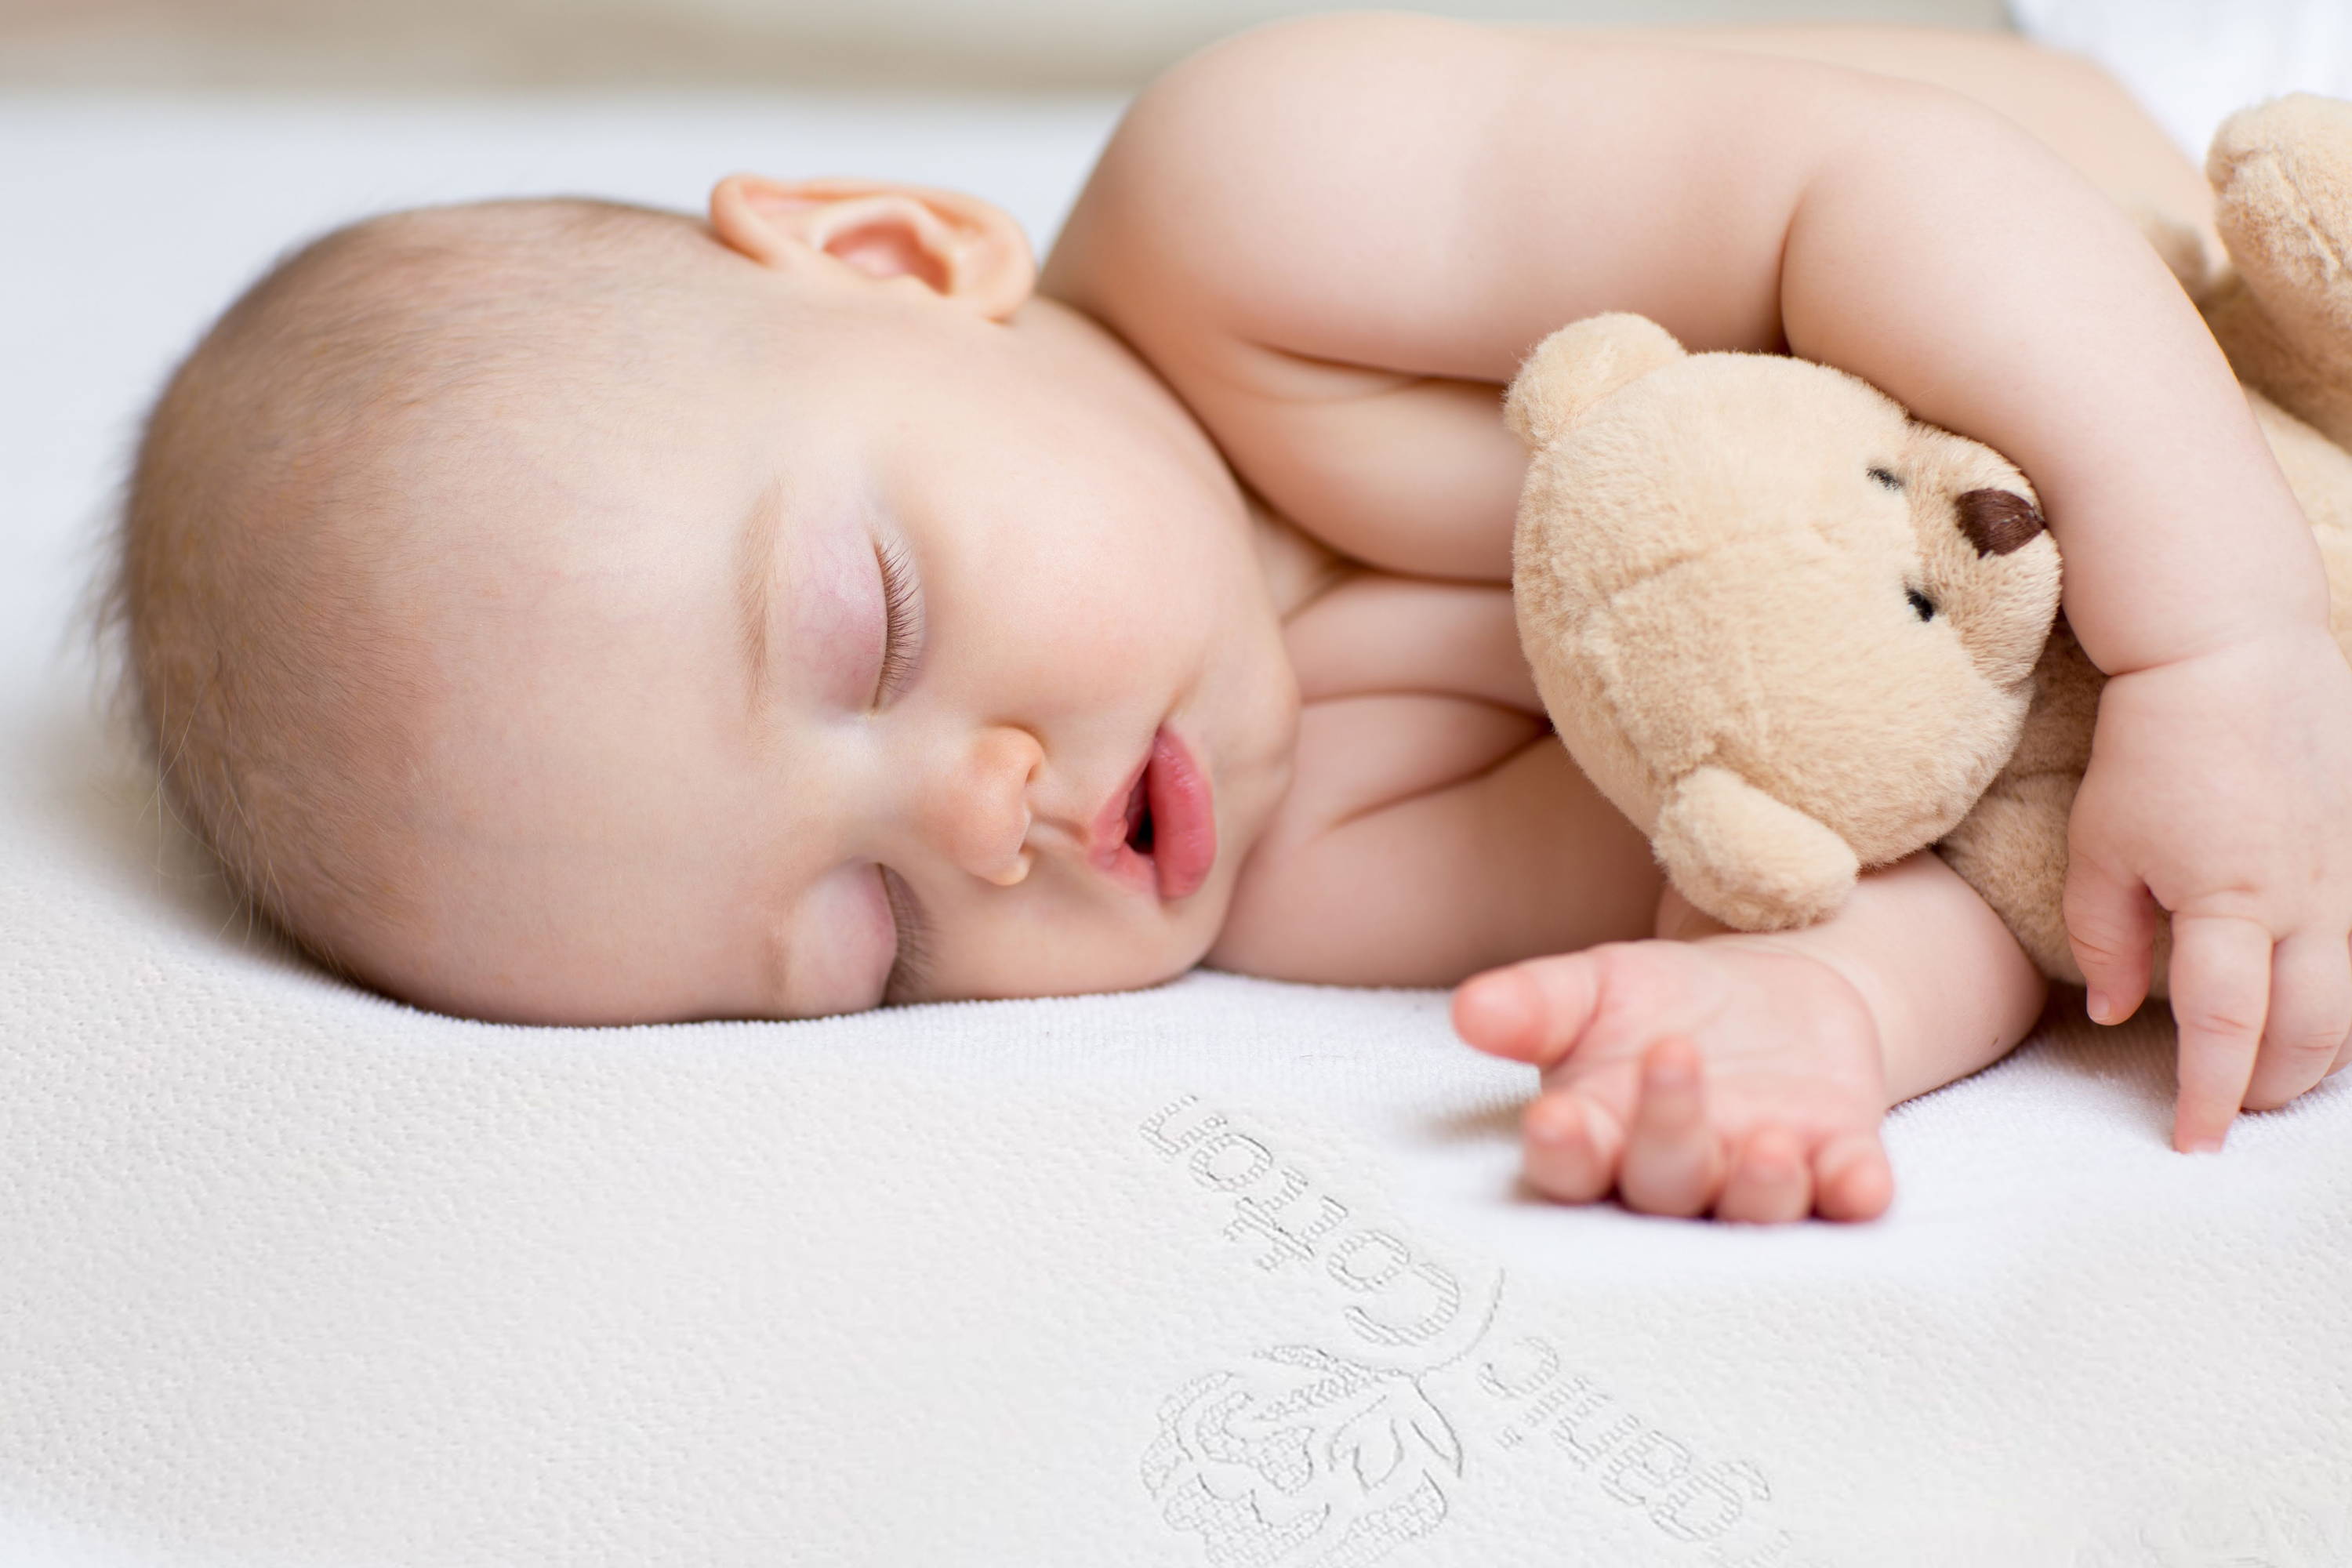 Sleeping baby on a healthy organic crib mattress that is firm to help prevent SIDS.